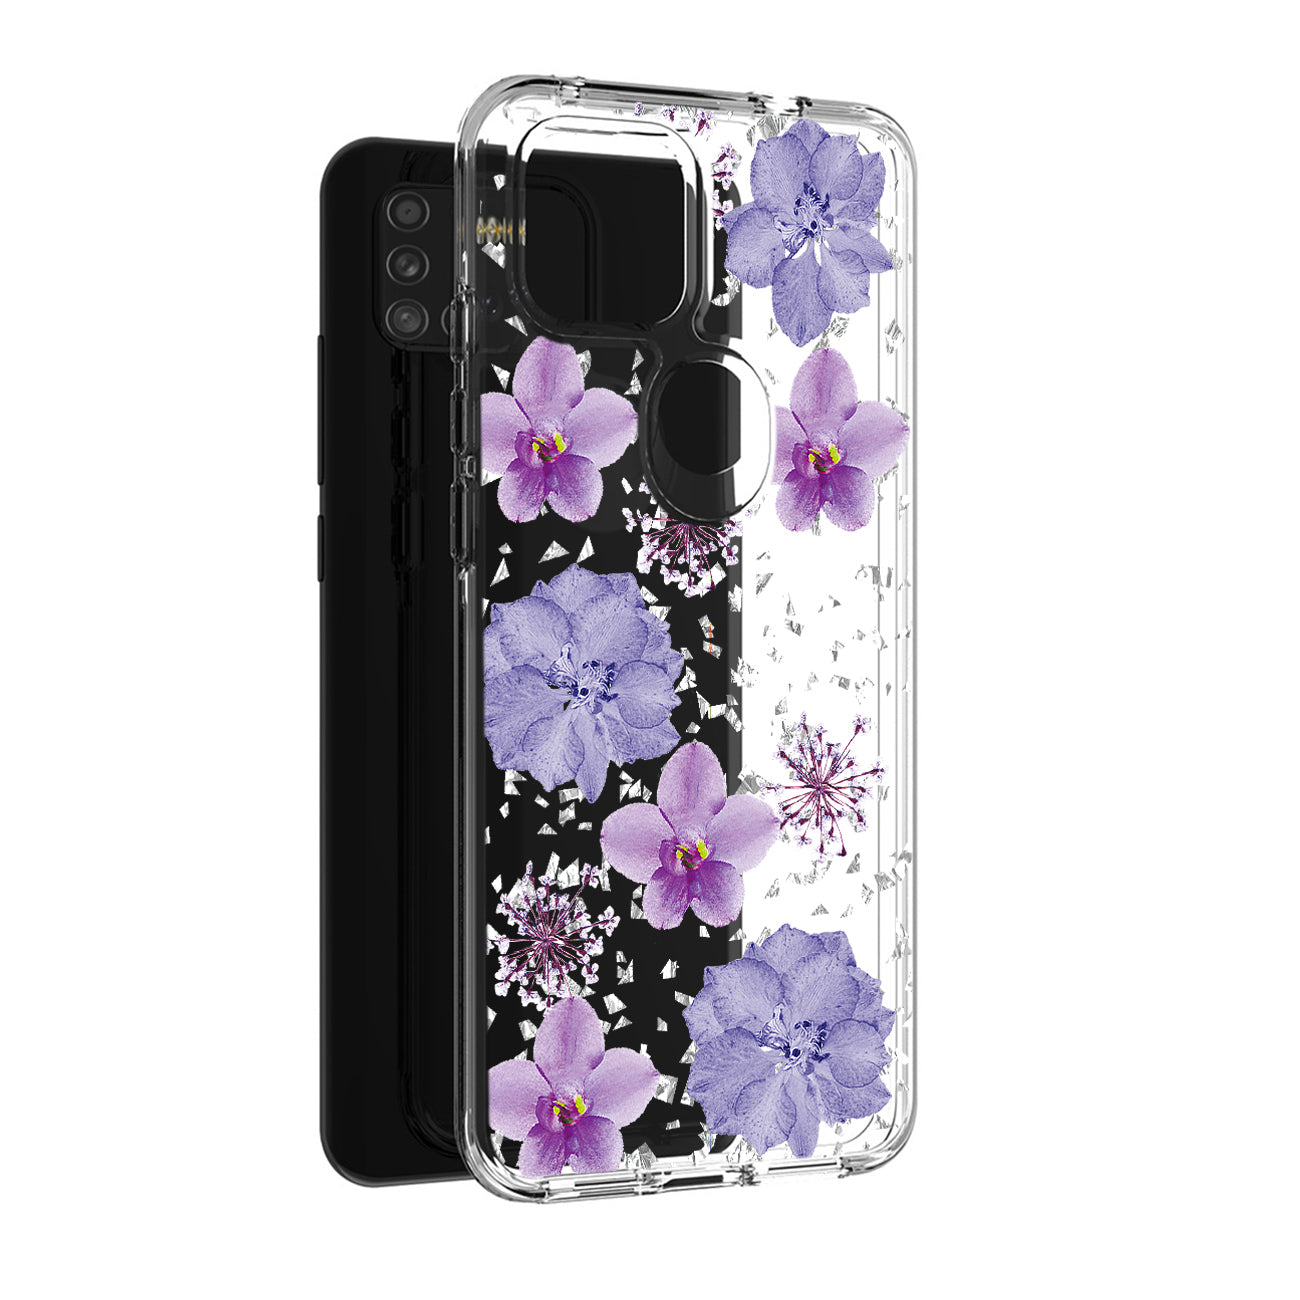 Pressed dried flower Design Phone case for SAMSUNG GALAXY A21S In Purple